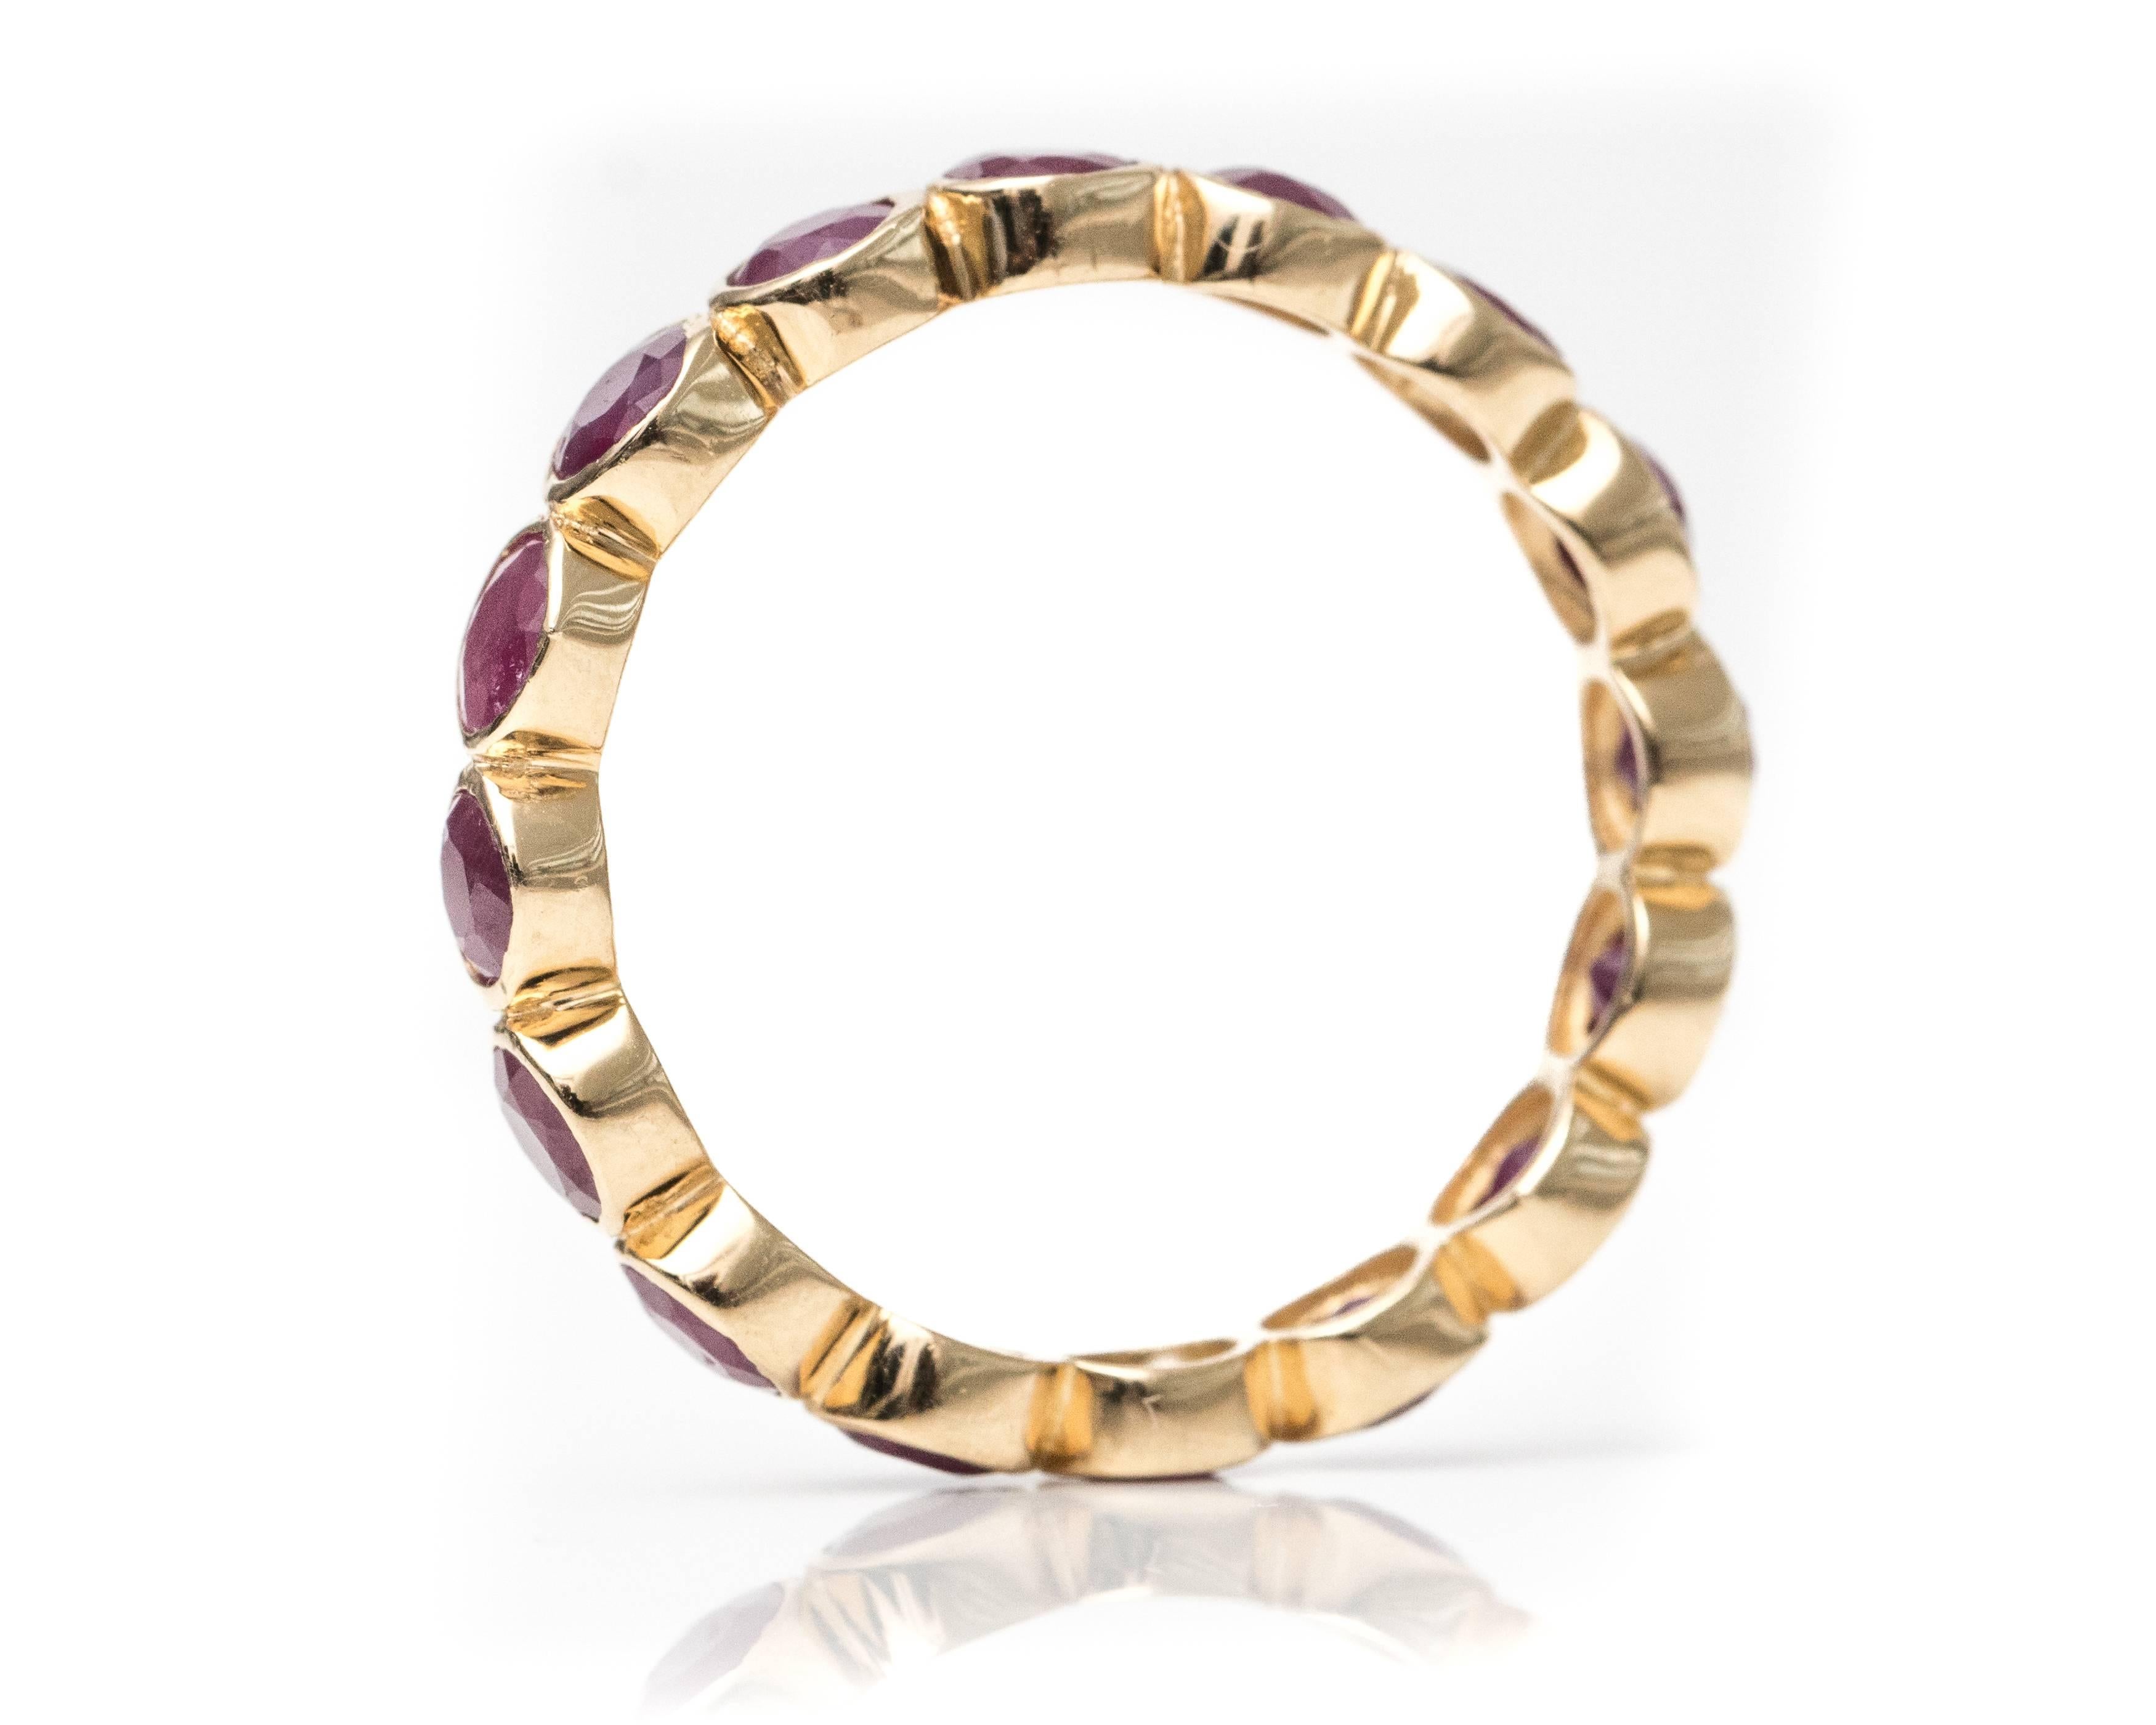 Round Cut 2.25 Carat Ruby and 18 Karat Yellow Gold Eternity Band For Sale